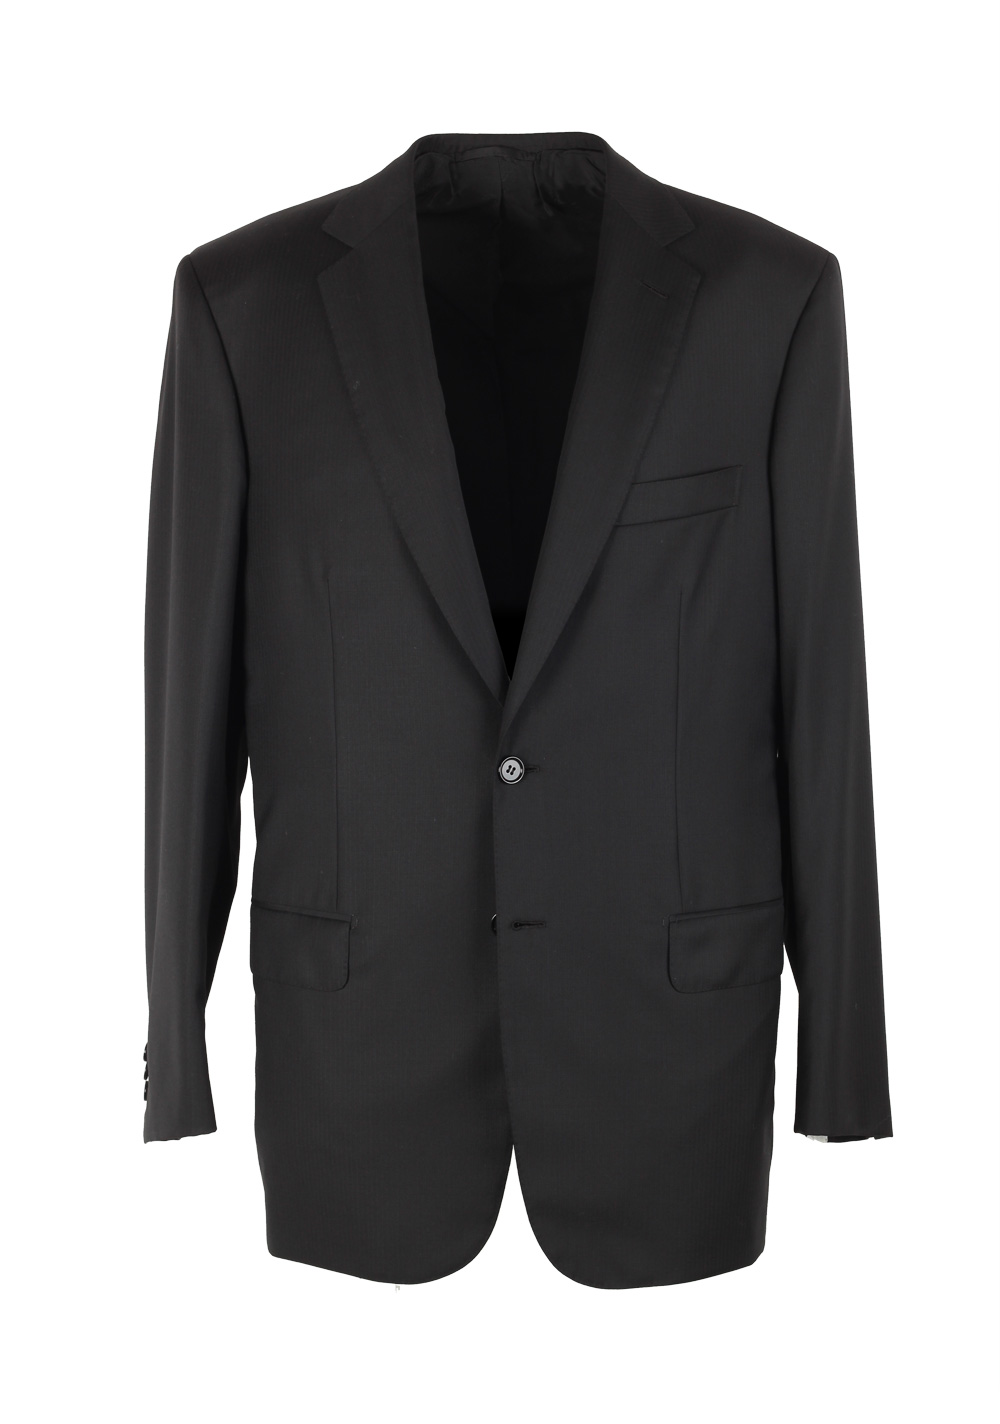 Brioni Colosseo Charcoal Suit Size 50 / 40R U.S. In Wool Super 150s | Costume Limité